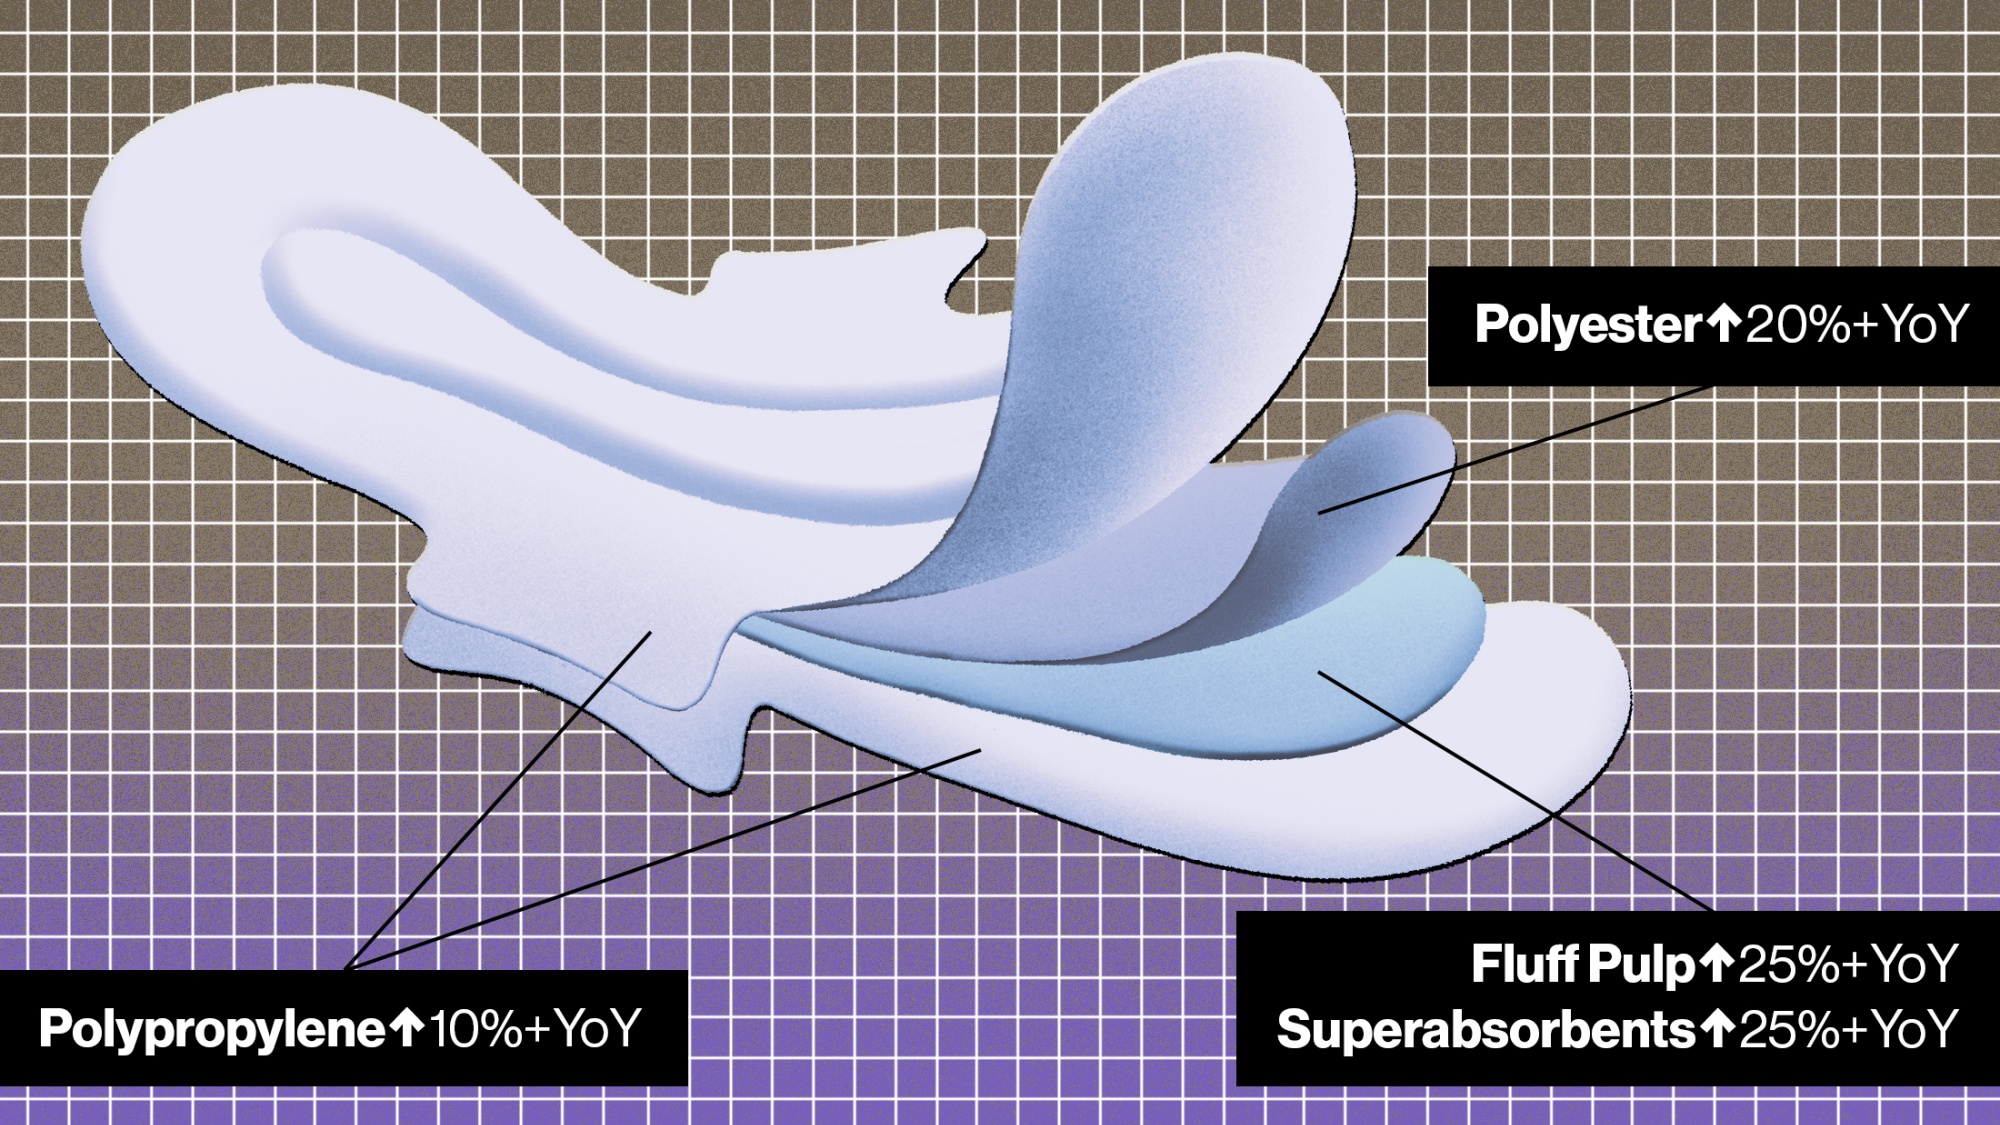 Menstrual pad component costs&nbsp;are ballooning.